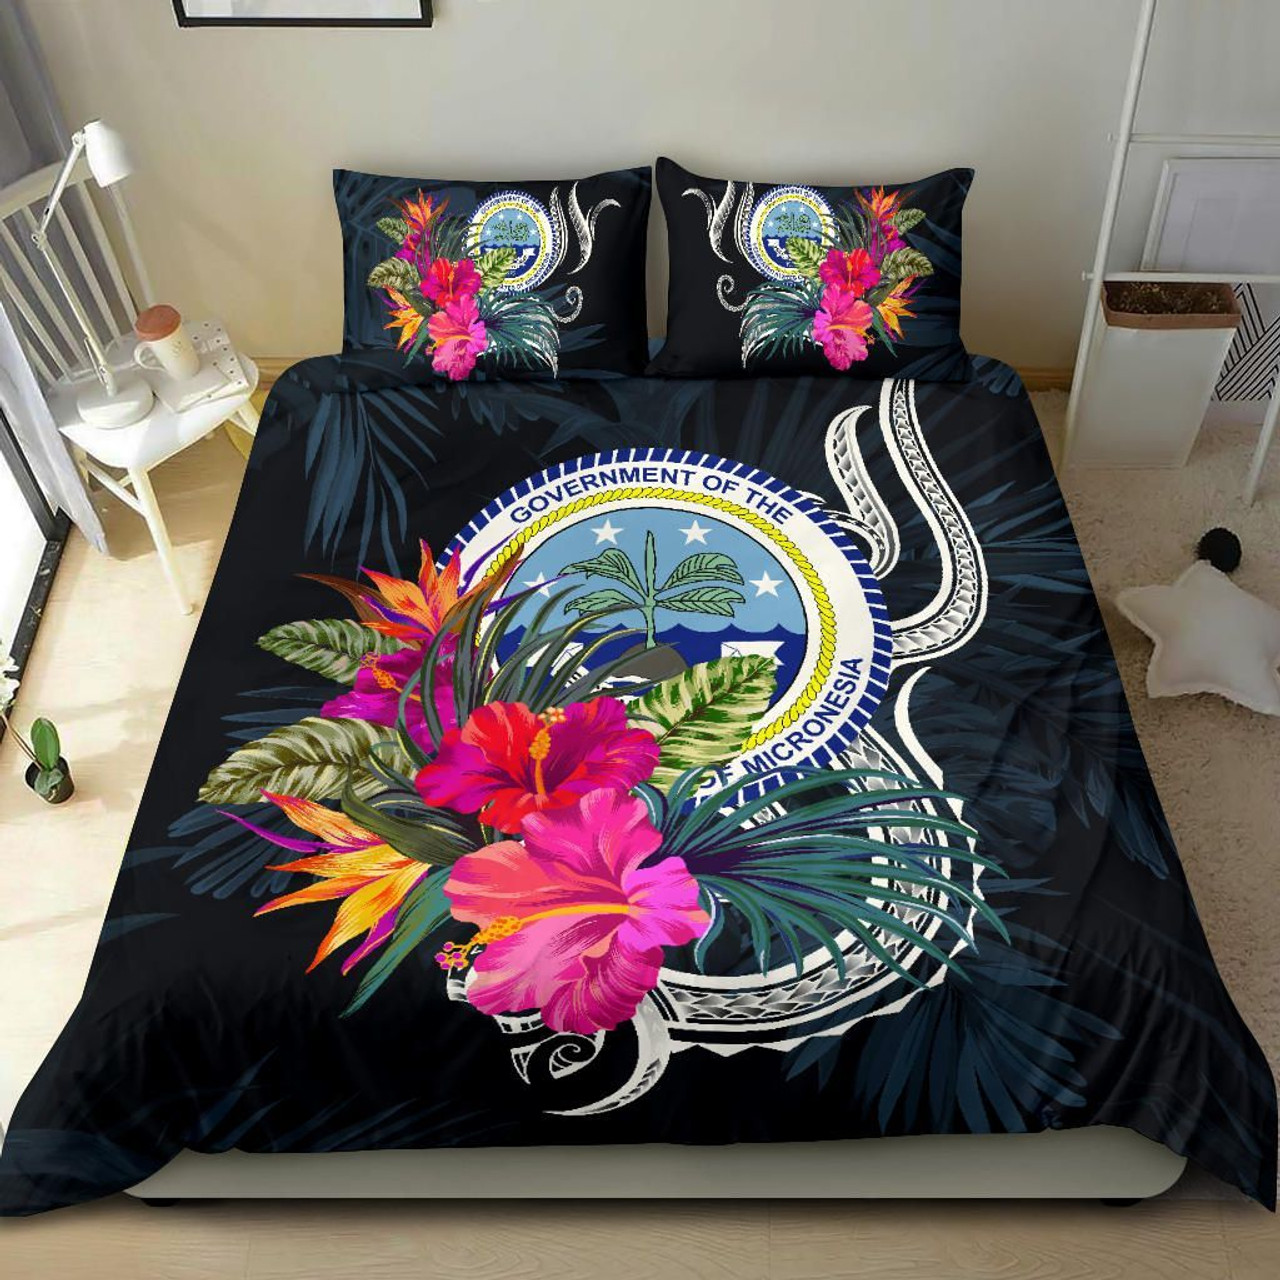 Polynesian Bedding Set - Federated States Of Micronesia Duvet Cover Set Tropical Flowers 1